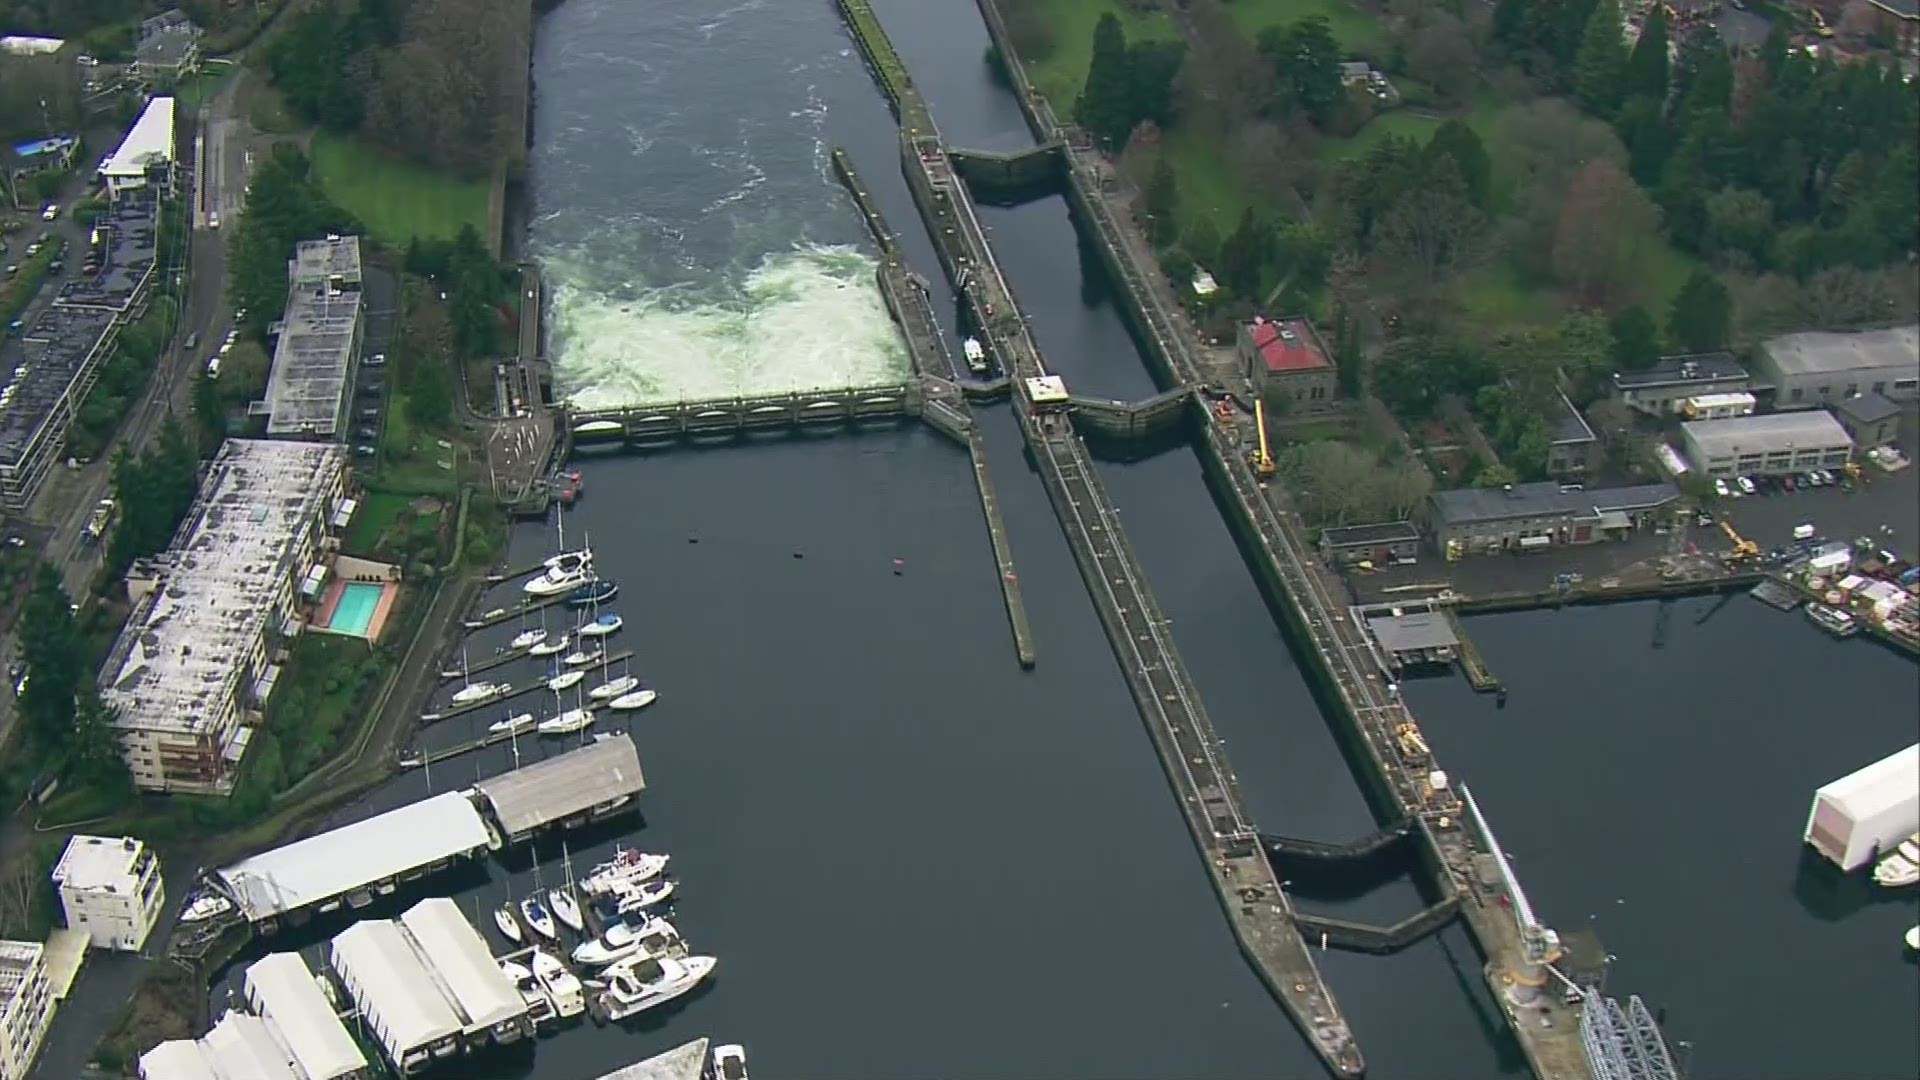 The large chamber at the Hiram M. Chittenden Locks in Ballard will be closed through April for renovations.